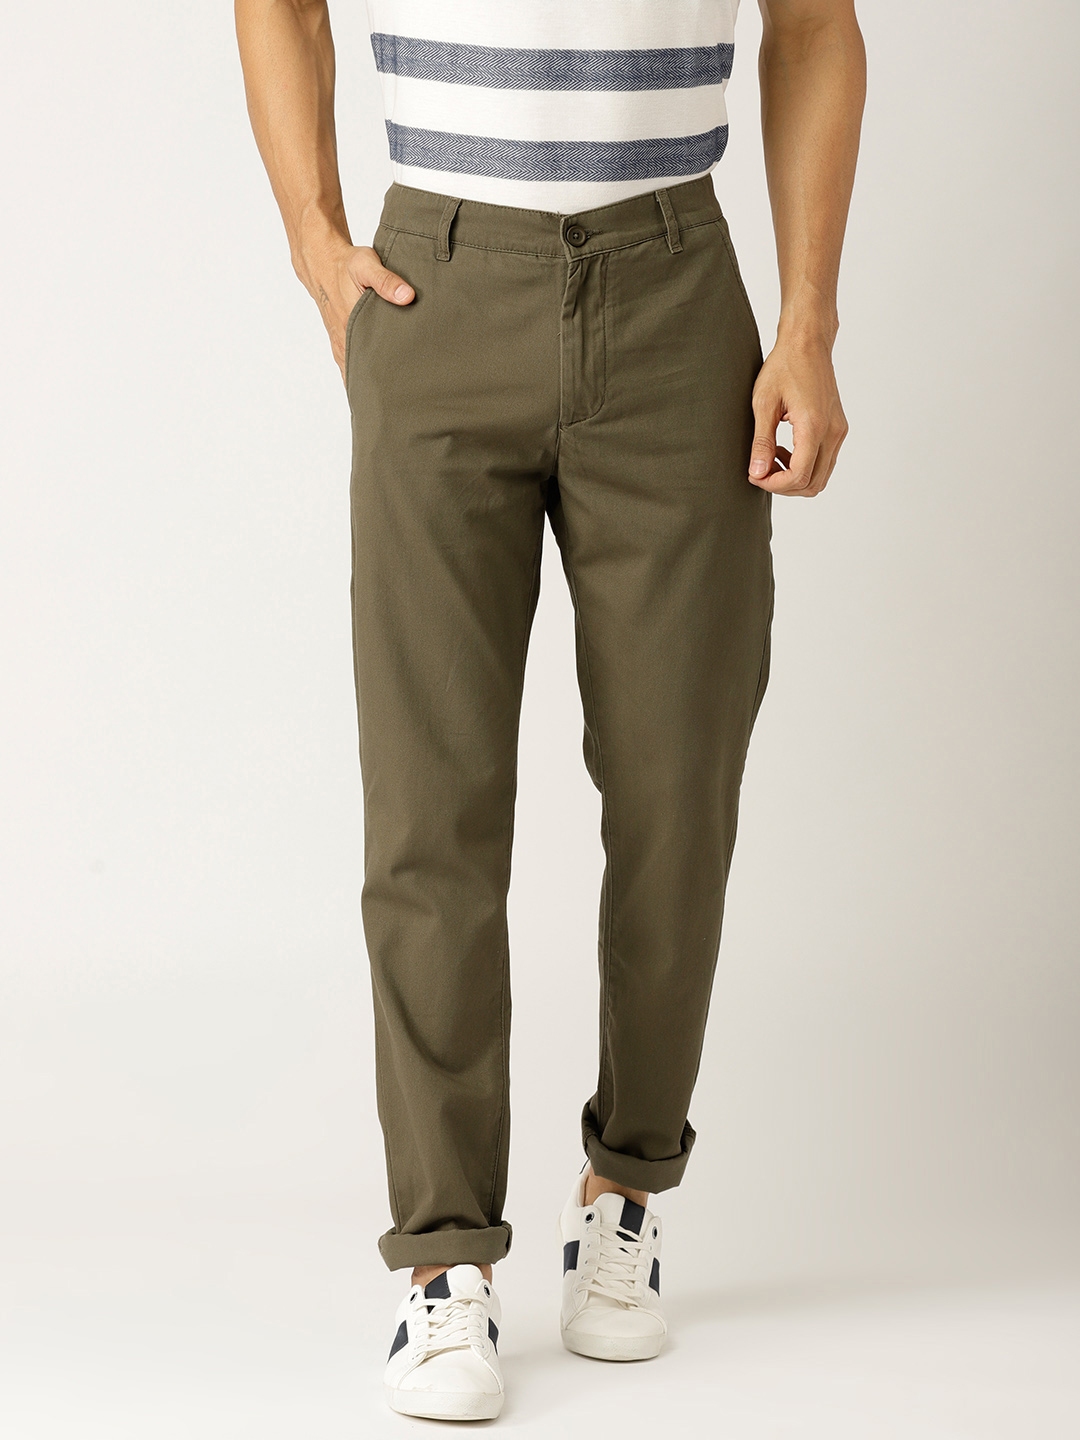 Buy United Colors Of Benetton Men Olive Green Slim Fit Solid Chinos ...